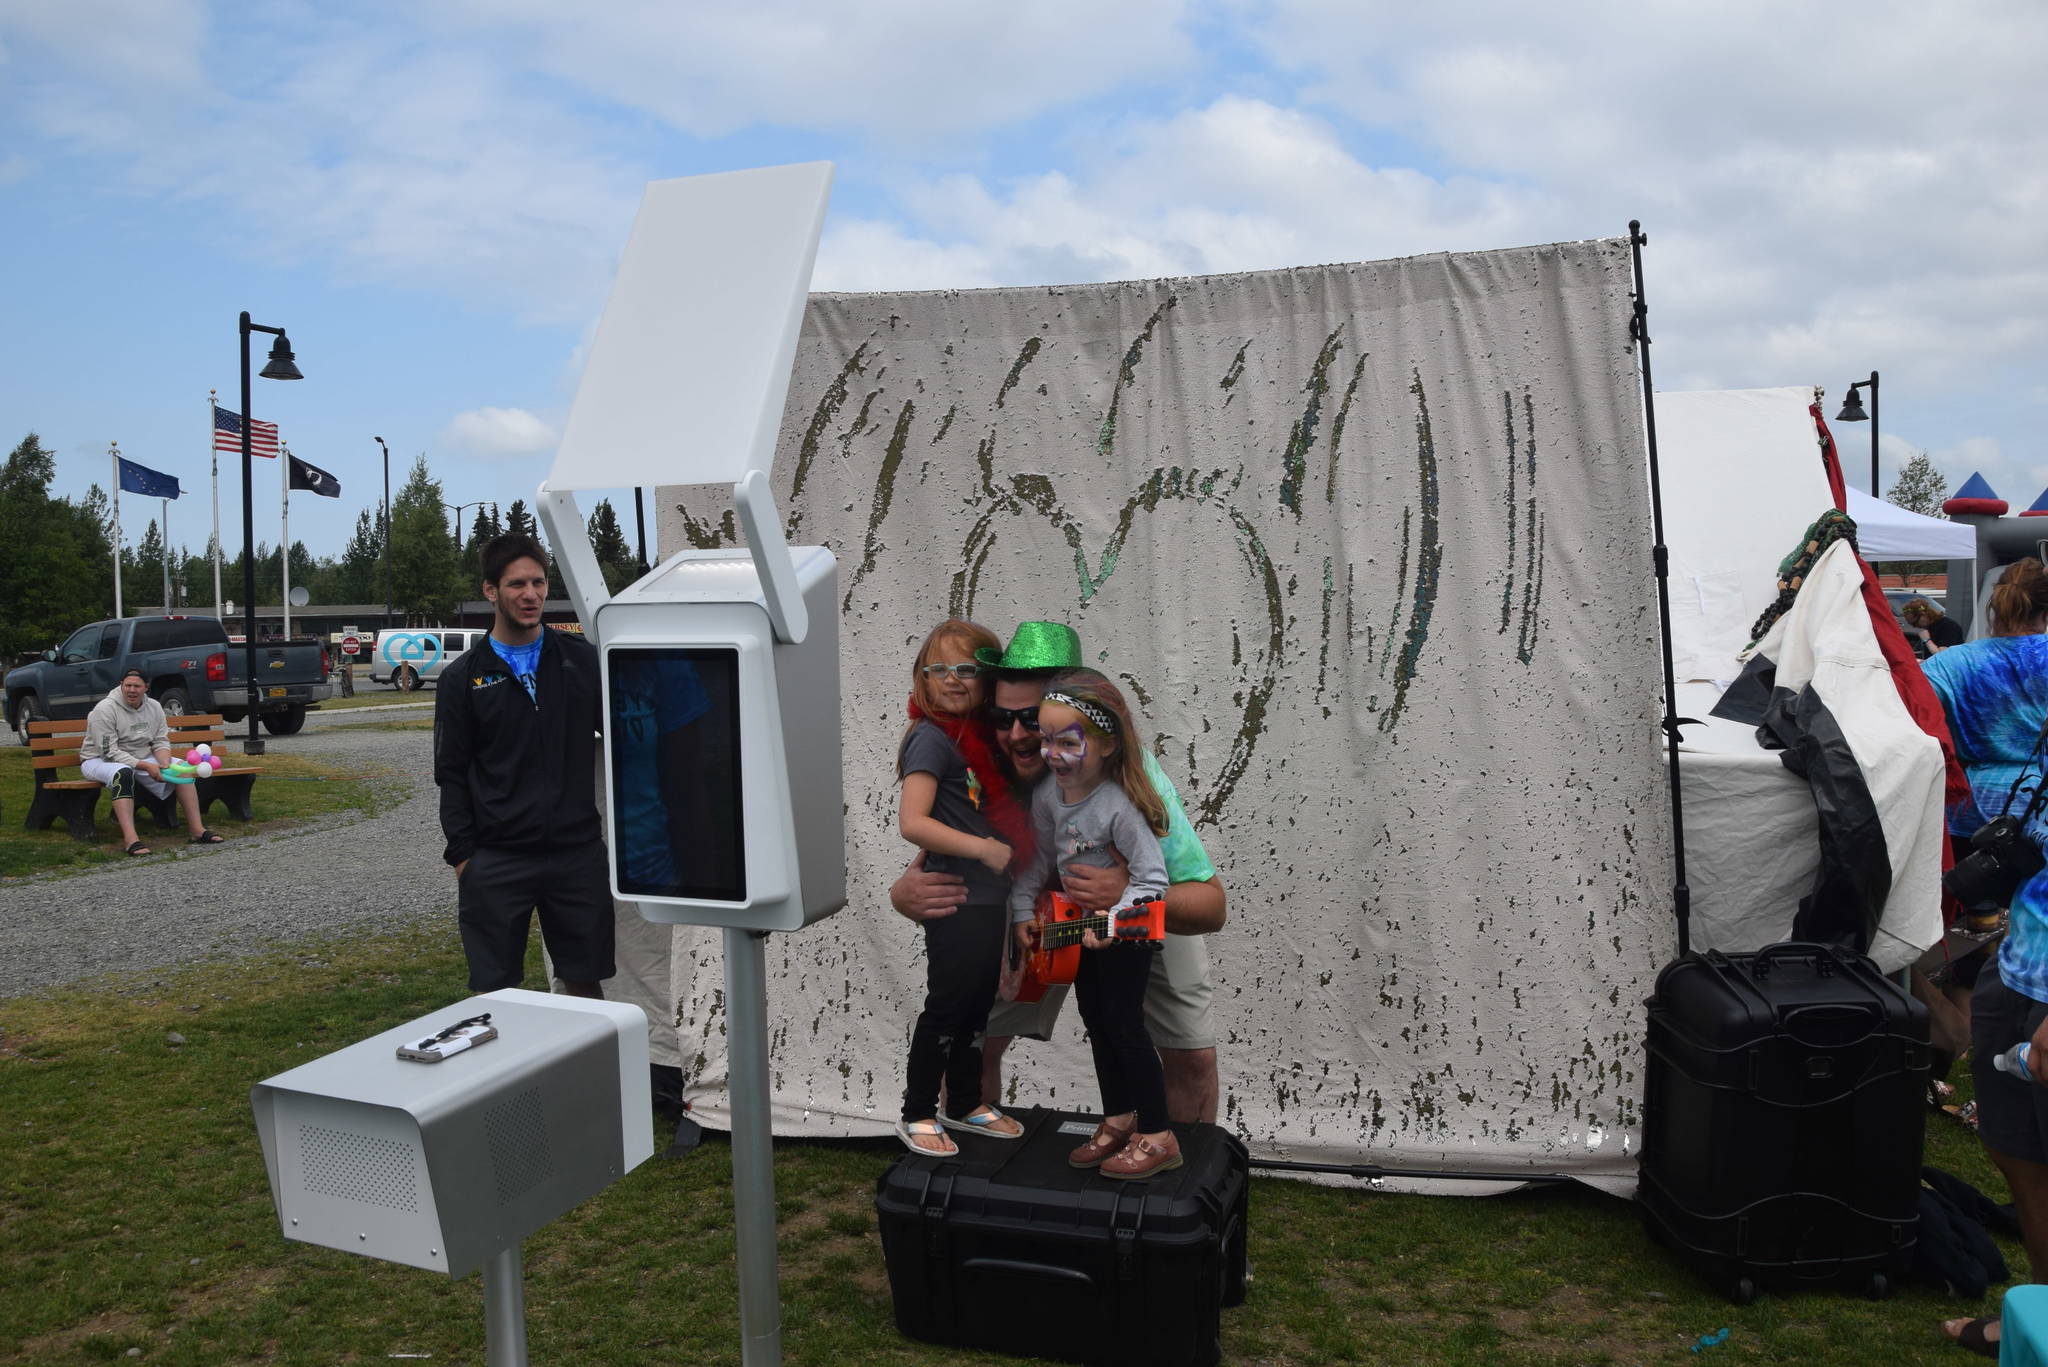 Chris Finley and his daughters Aubree and Danni pose at the photo booth during the 2019 Disability Pride Celebration in Soldotna Creek Park on July 20, 2019. (Photo by Brian Mazurek/Peninsula Clarion)